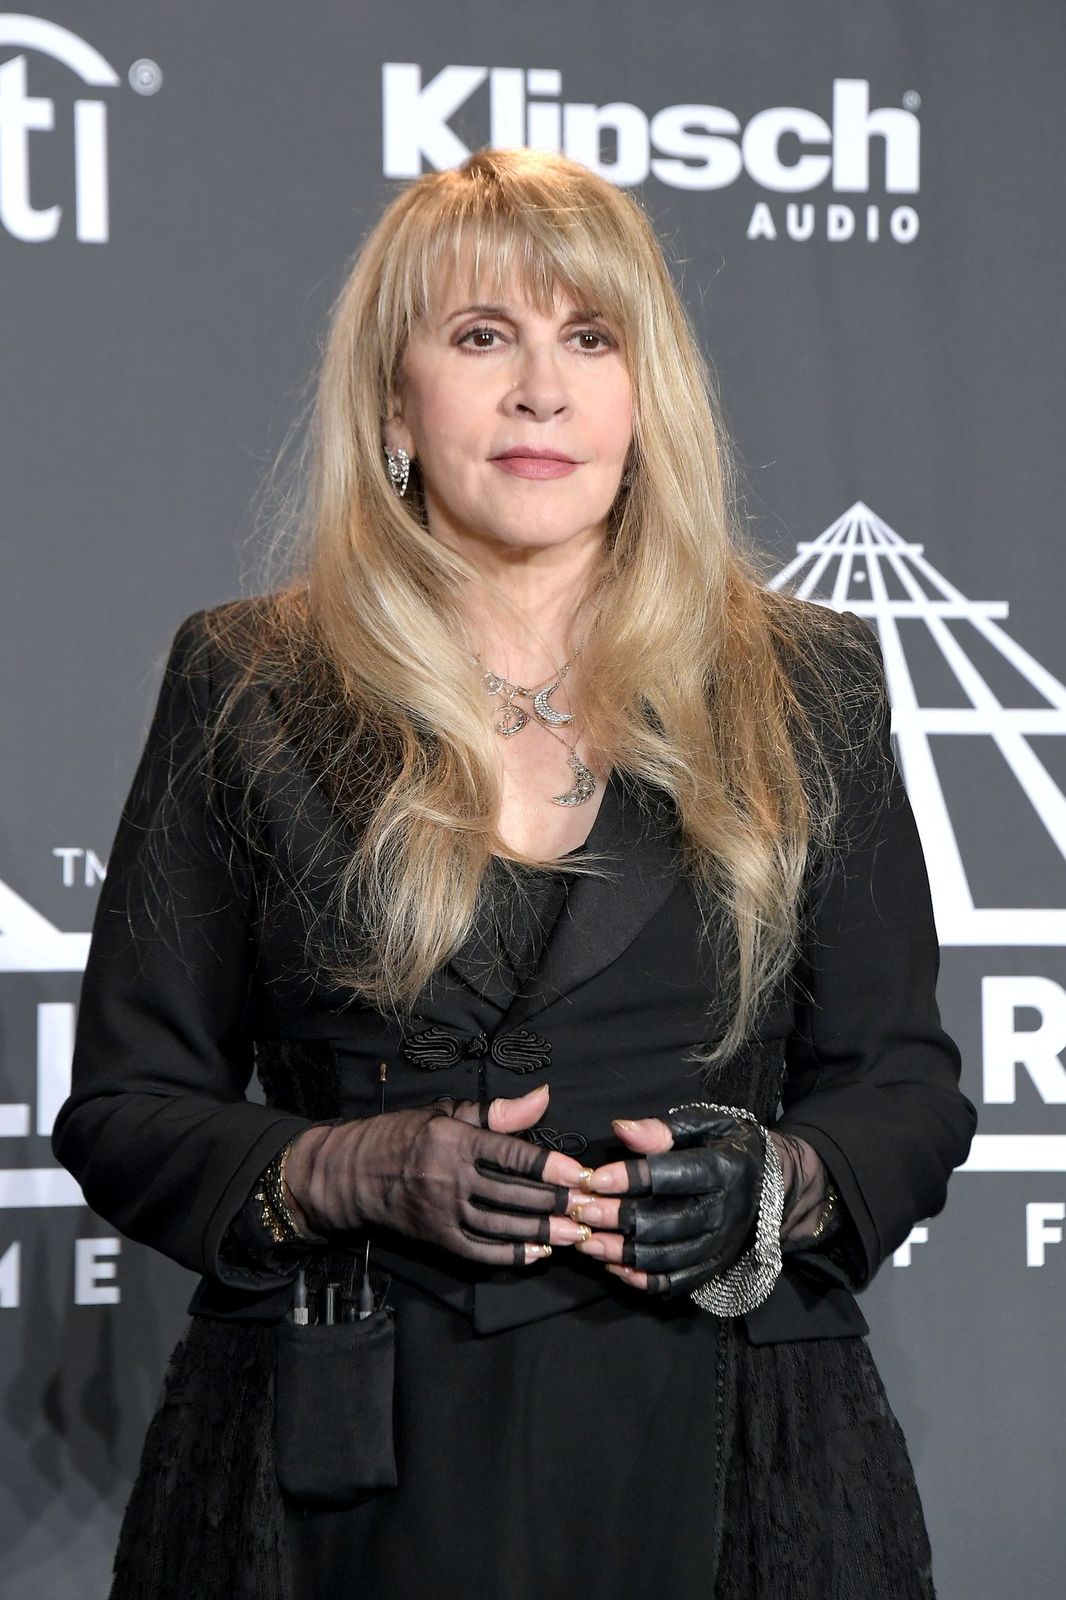 Inductee Stevie Nicks at the 2019 Rock & Roll Hall Of Fame Induction Ceremony - Press Room at Barclays Center on March 29, 2019 | Photo: Getty Images